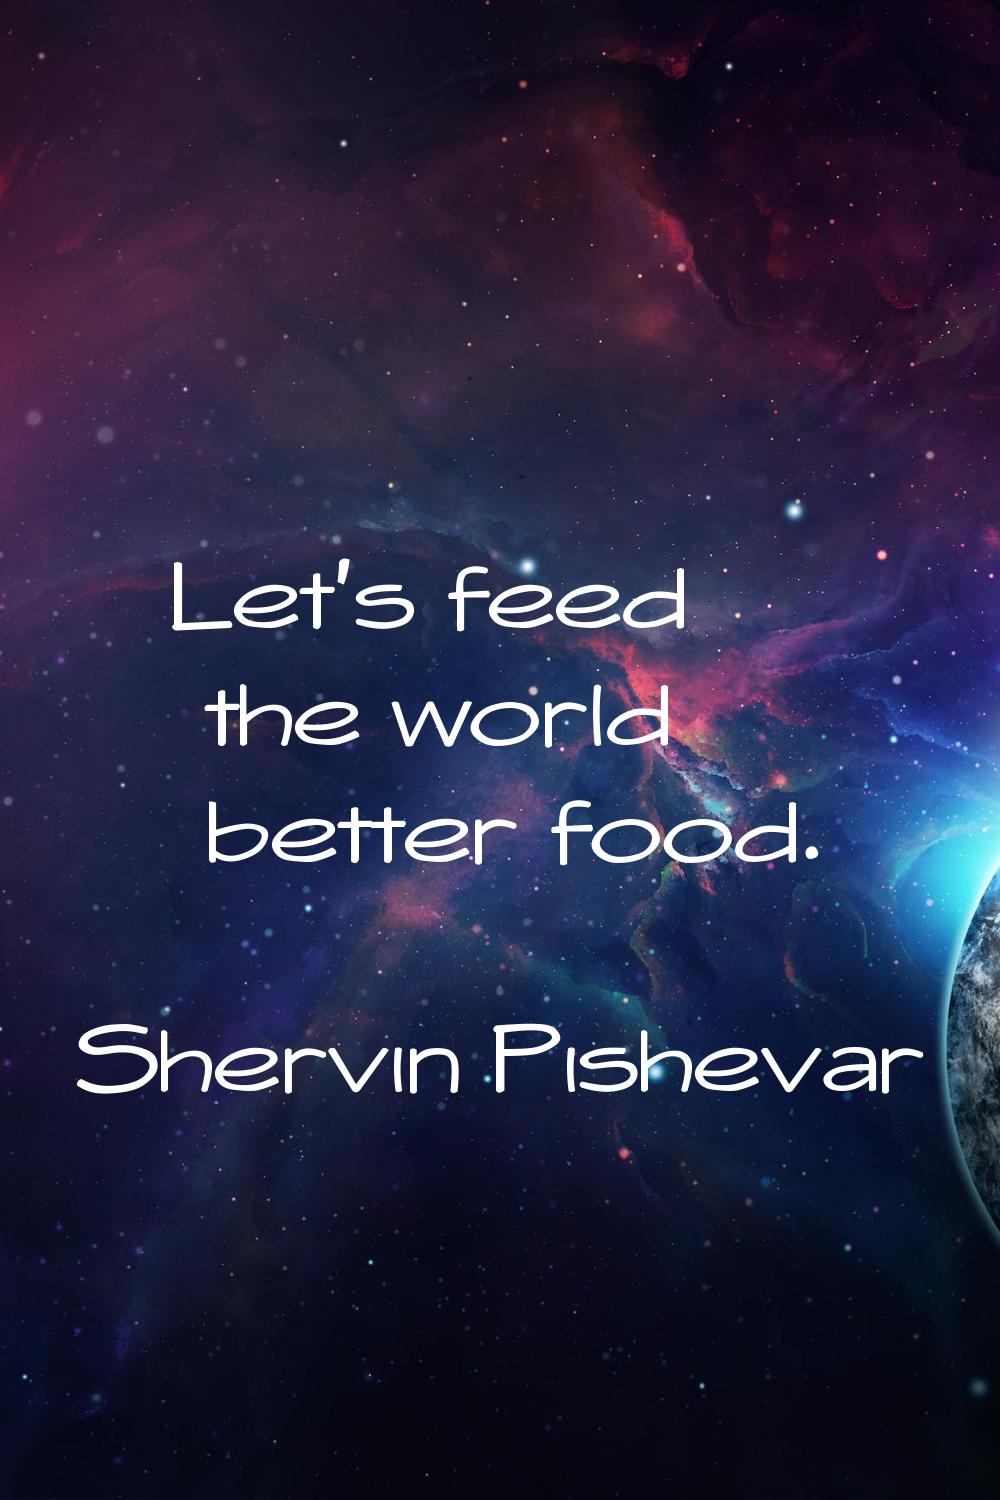 Let's feed the world better food.